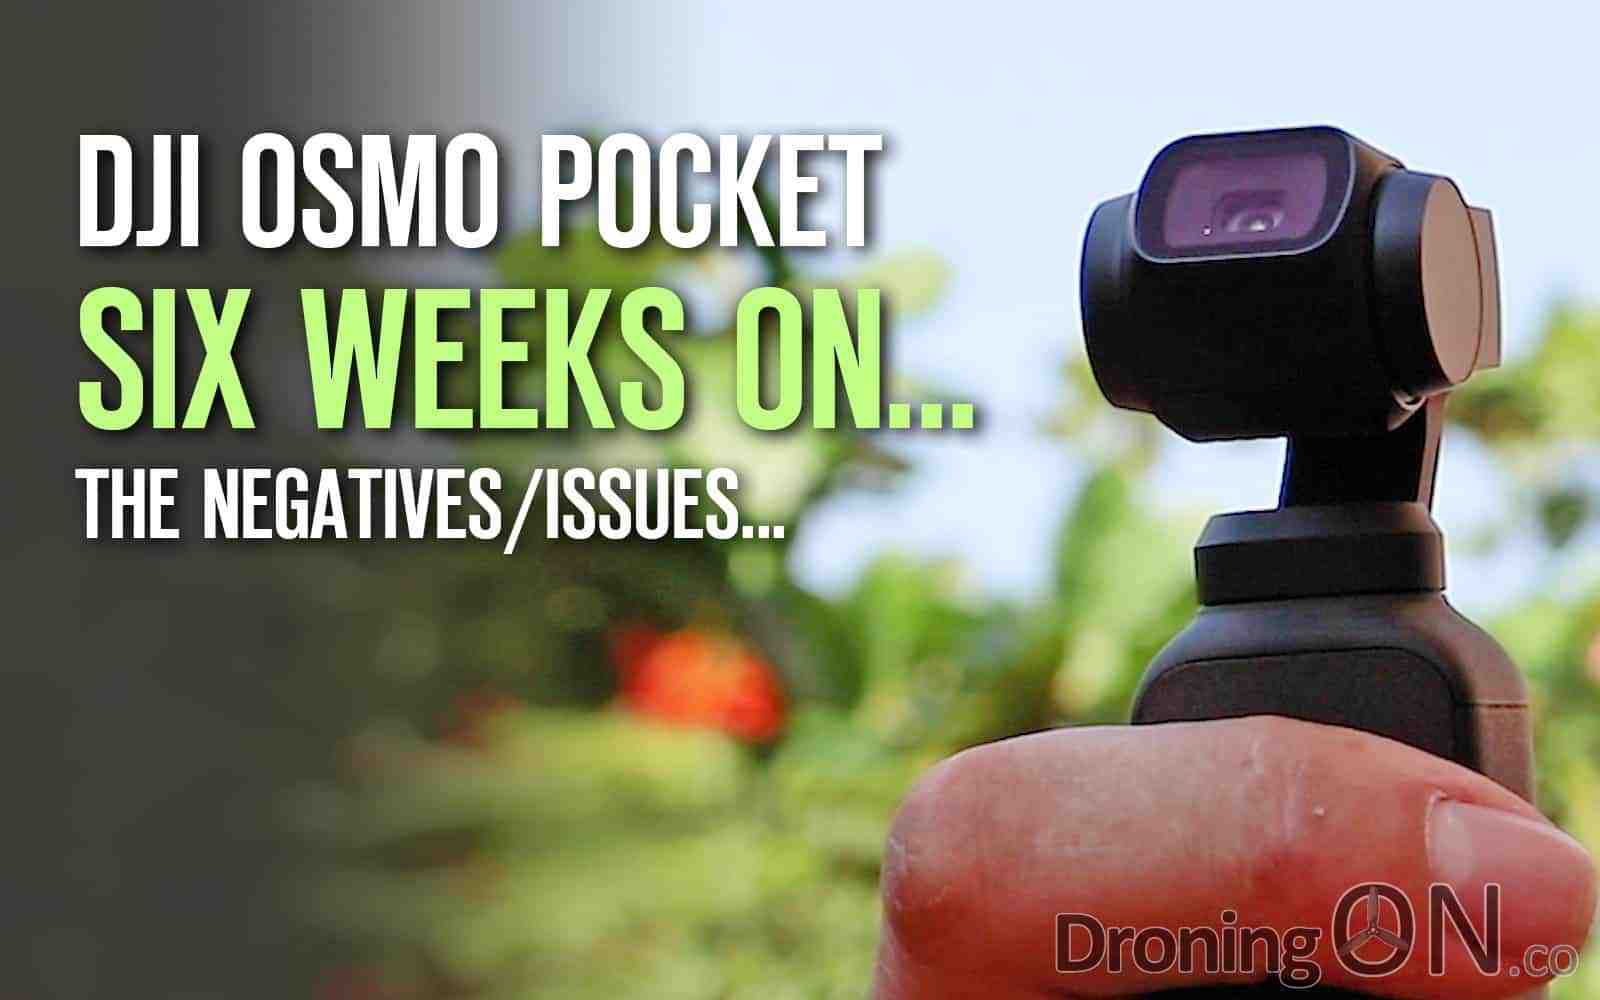 The DJI Osmo Pocket was launched over a month ago, we've had ours for six weeks and in this video, we summarise the negatives and issues.